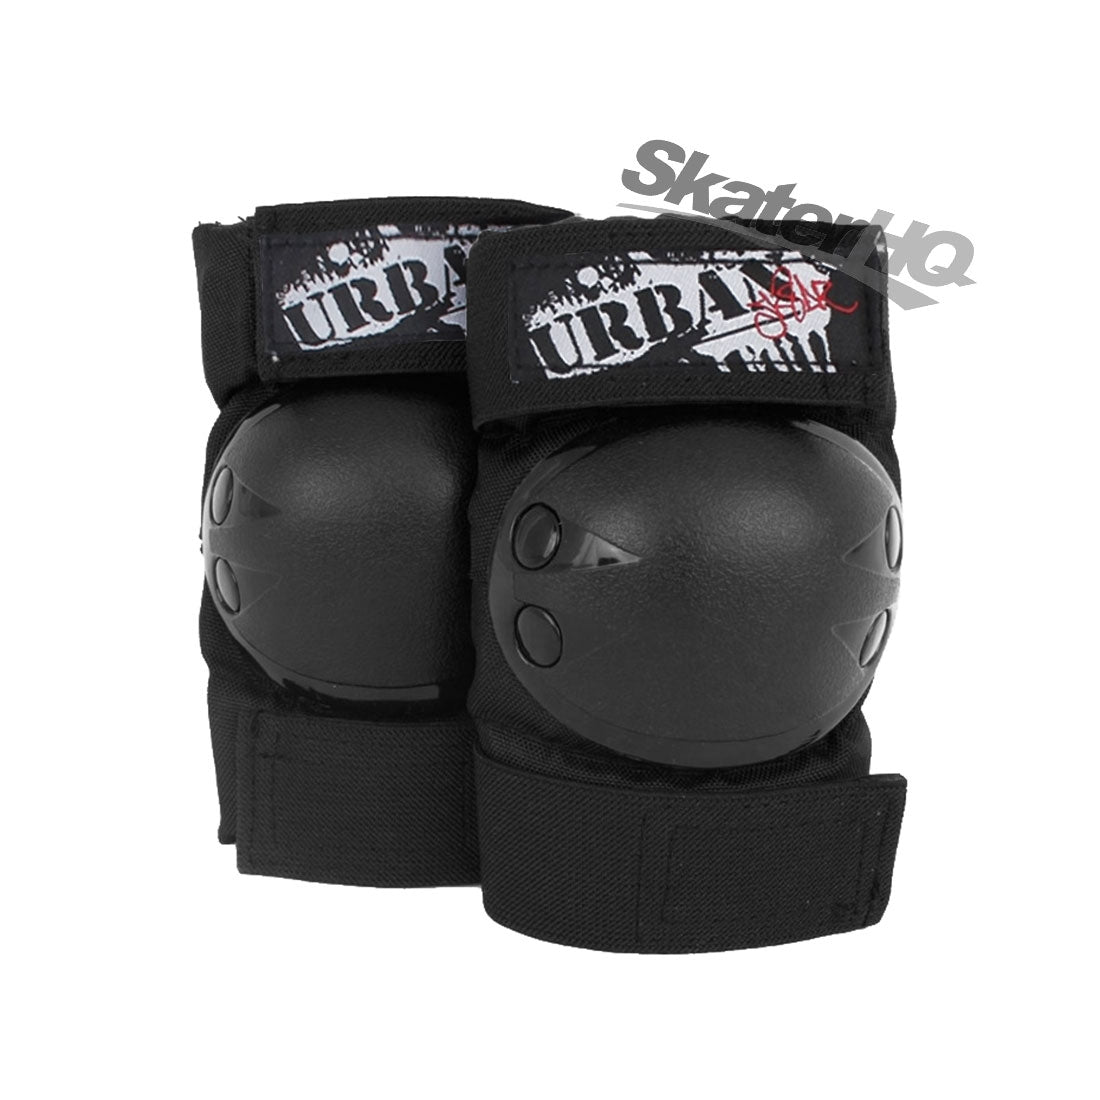 Urban Skater Elbow Pads - Grommet Protective Gear